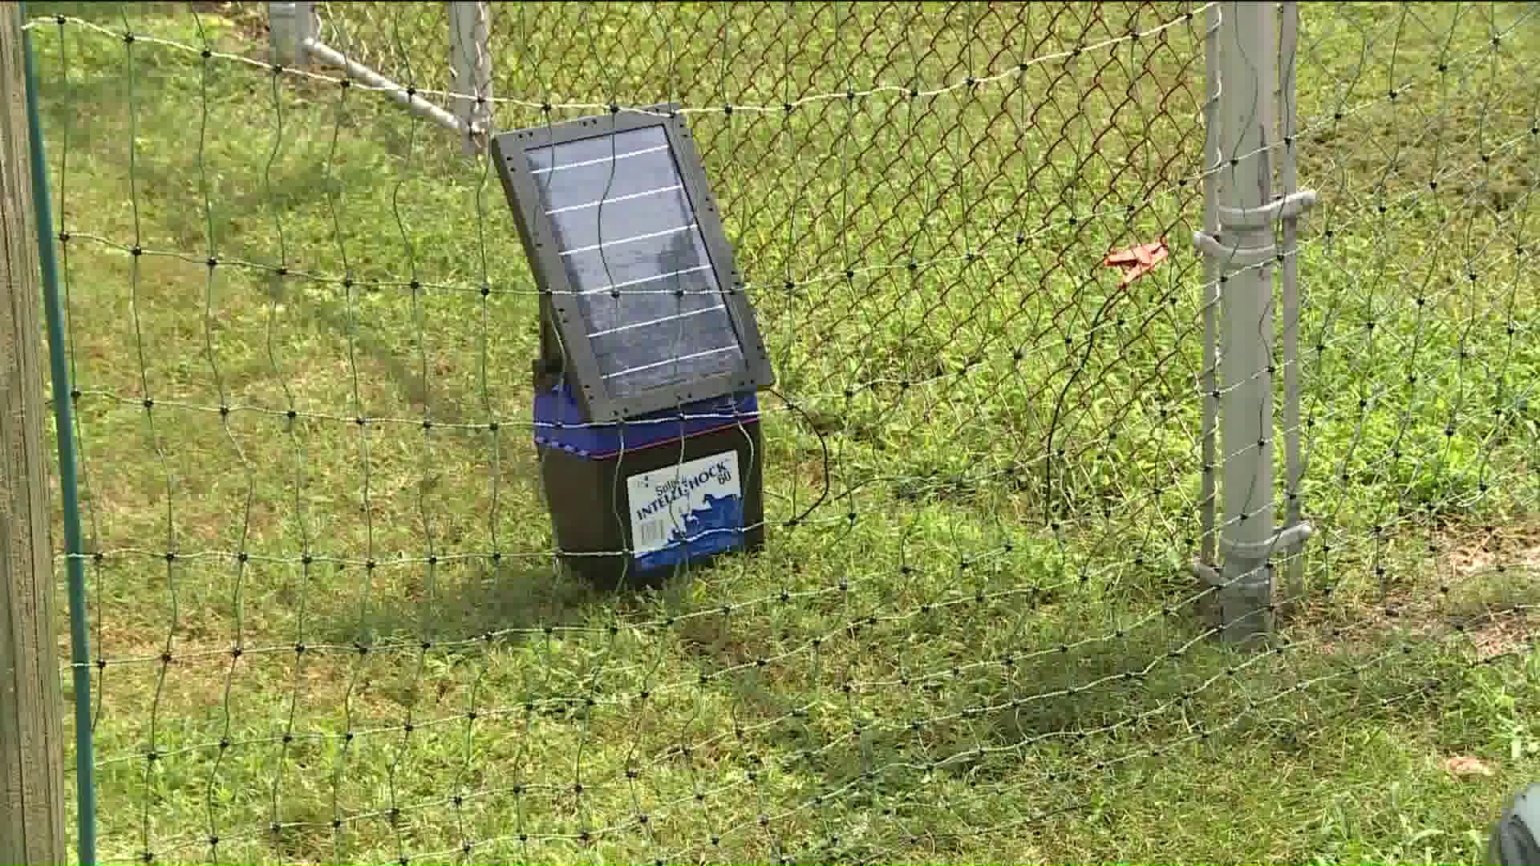 Parents Outraged After Man Puts Up Electric Fence Near Bus Stop